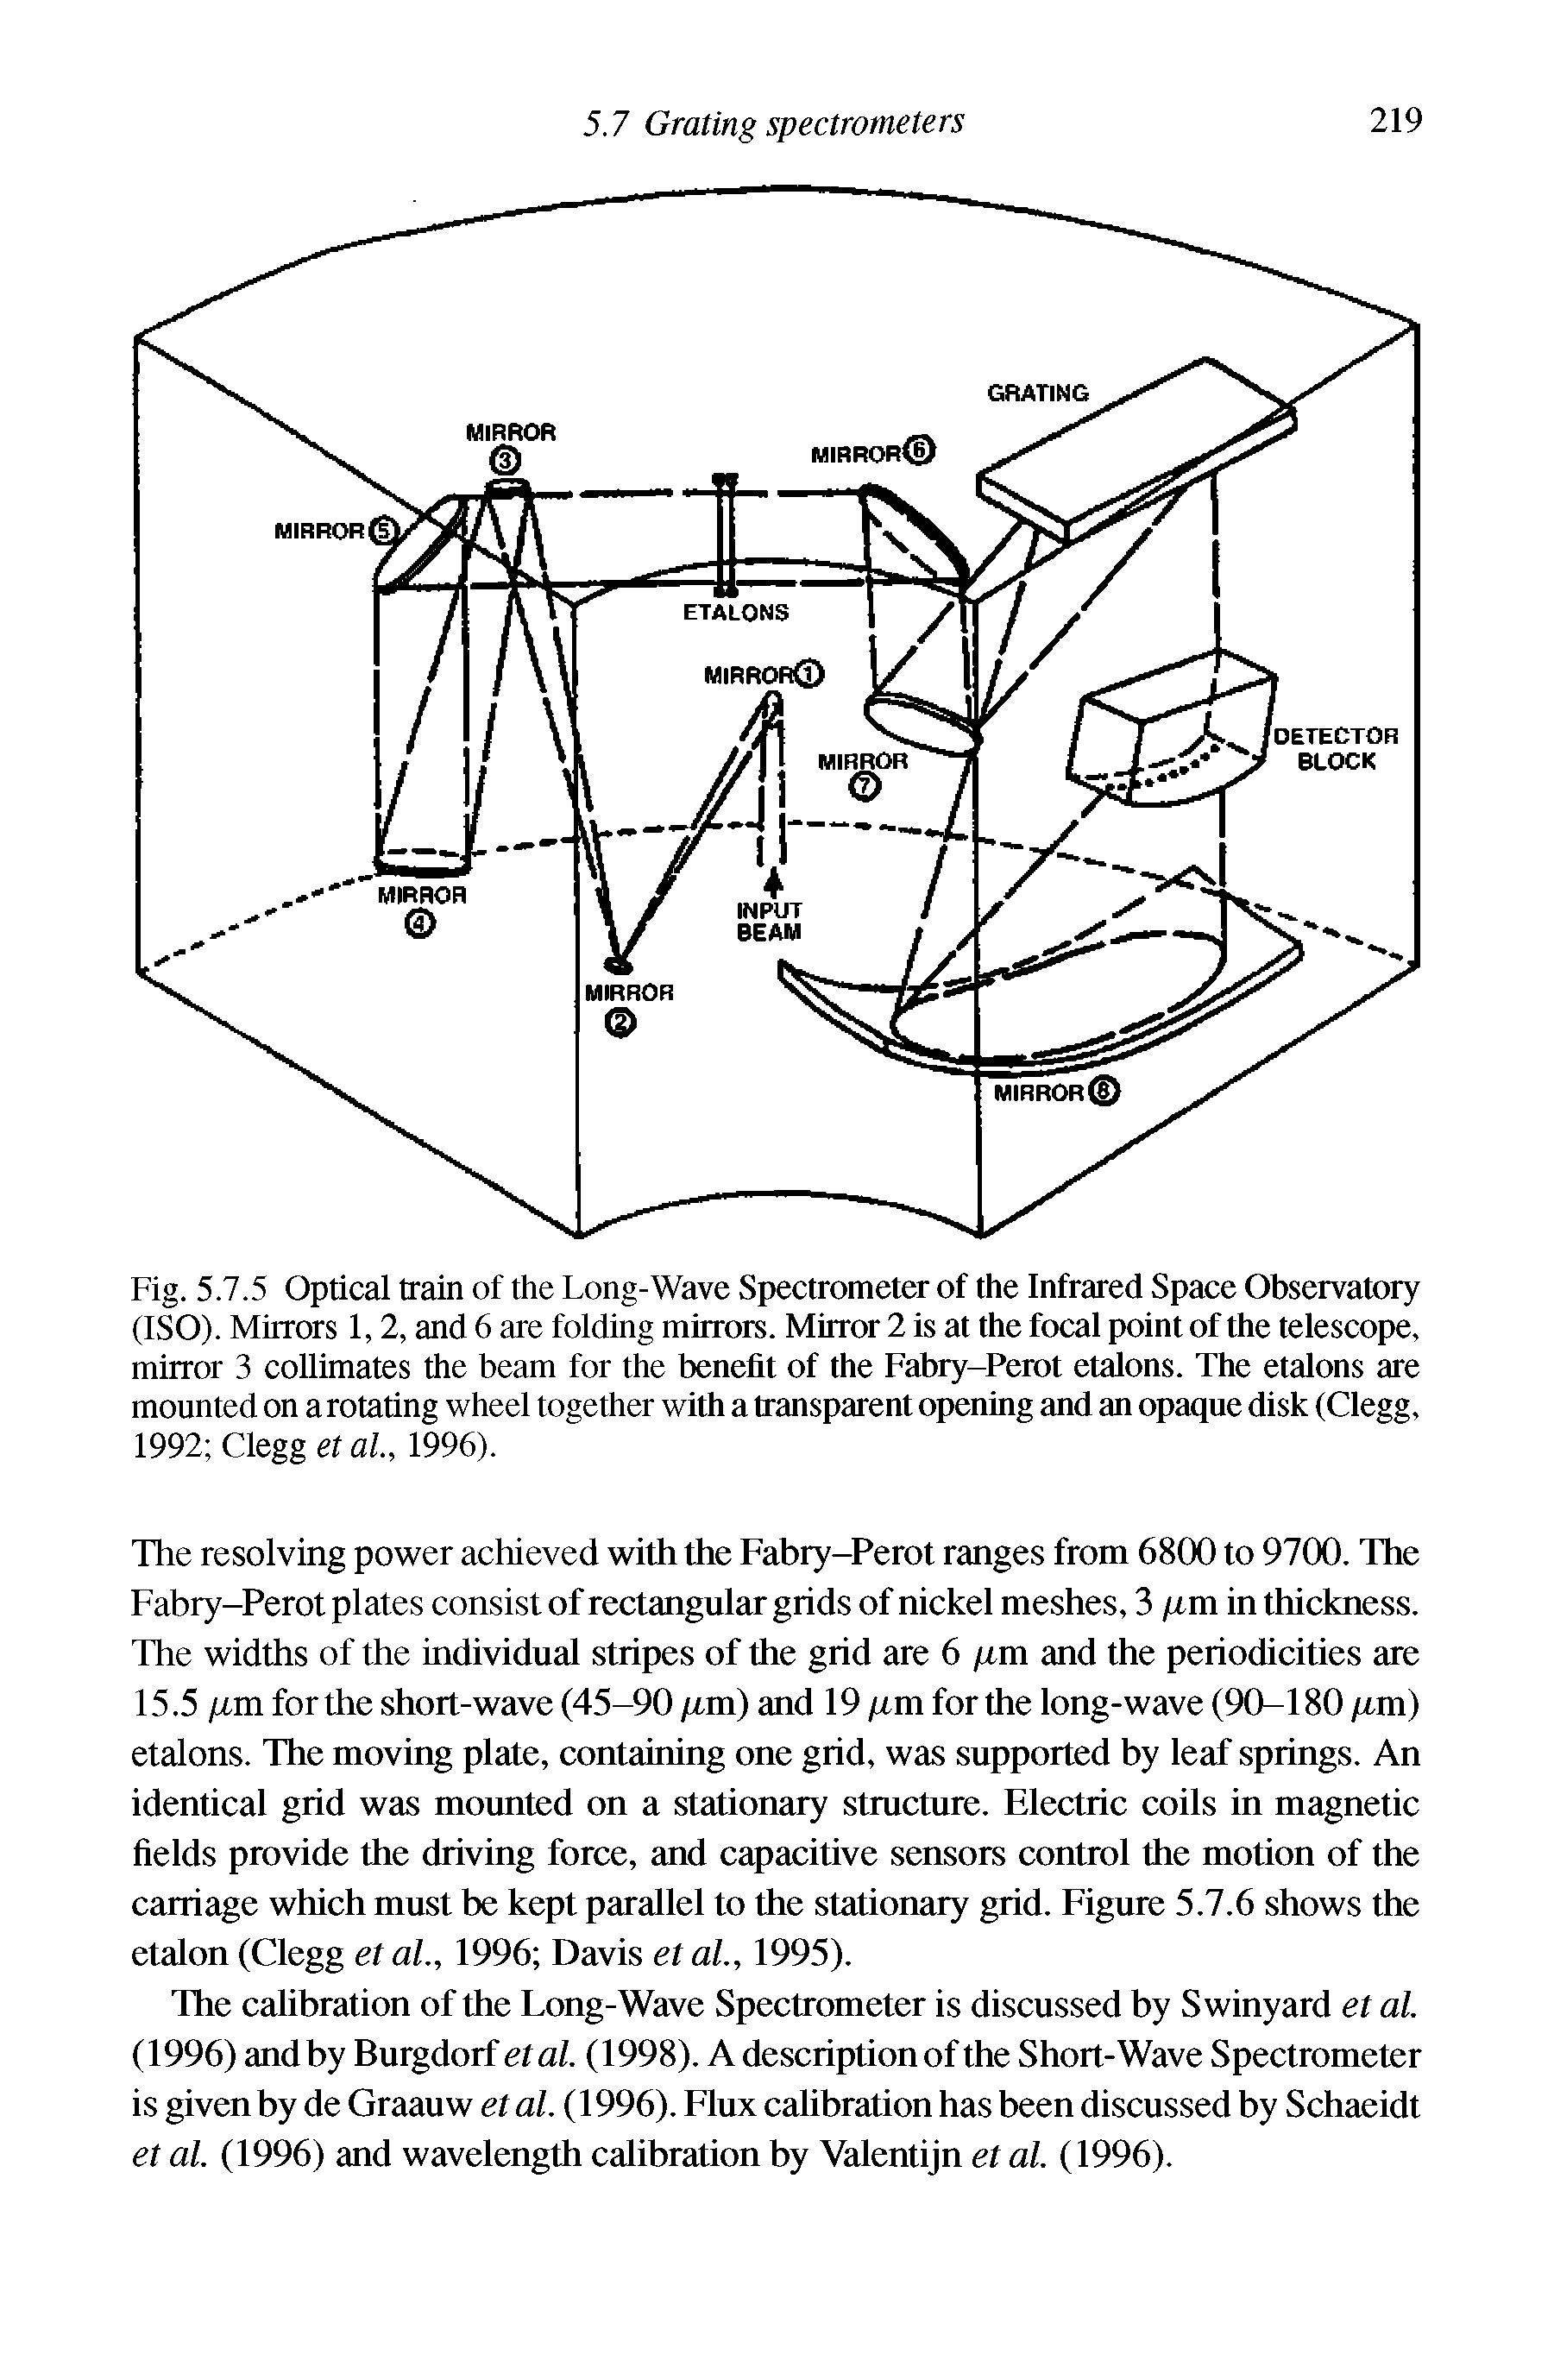 Fig. 5.7.5 Optical train of the Long-Wave Spectrometer of the Infrared Space Observatory (ISO). Mirrors 1,2, and 6 are folding mirrors. Mirror 2 is at the focal point of the telescope, mirror 3 collimates the beam for the benefit of the Fabry-Perot et ons. The etalons are mounted on a rotating wheel together with a transparent opening and an opaque disk (Clegg, 1992 Clegg et al, 1996).